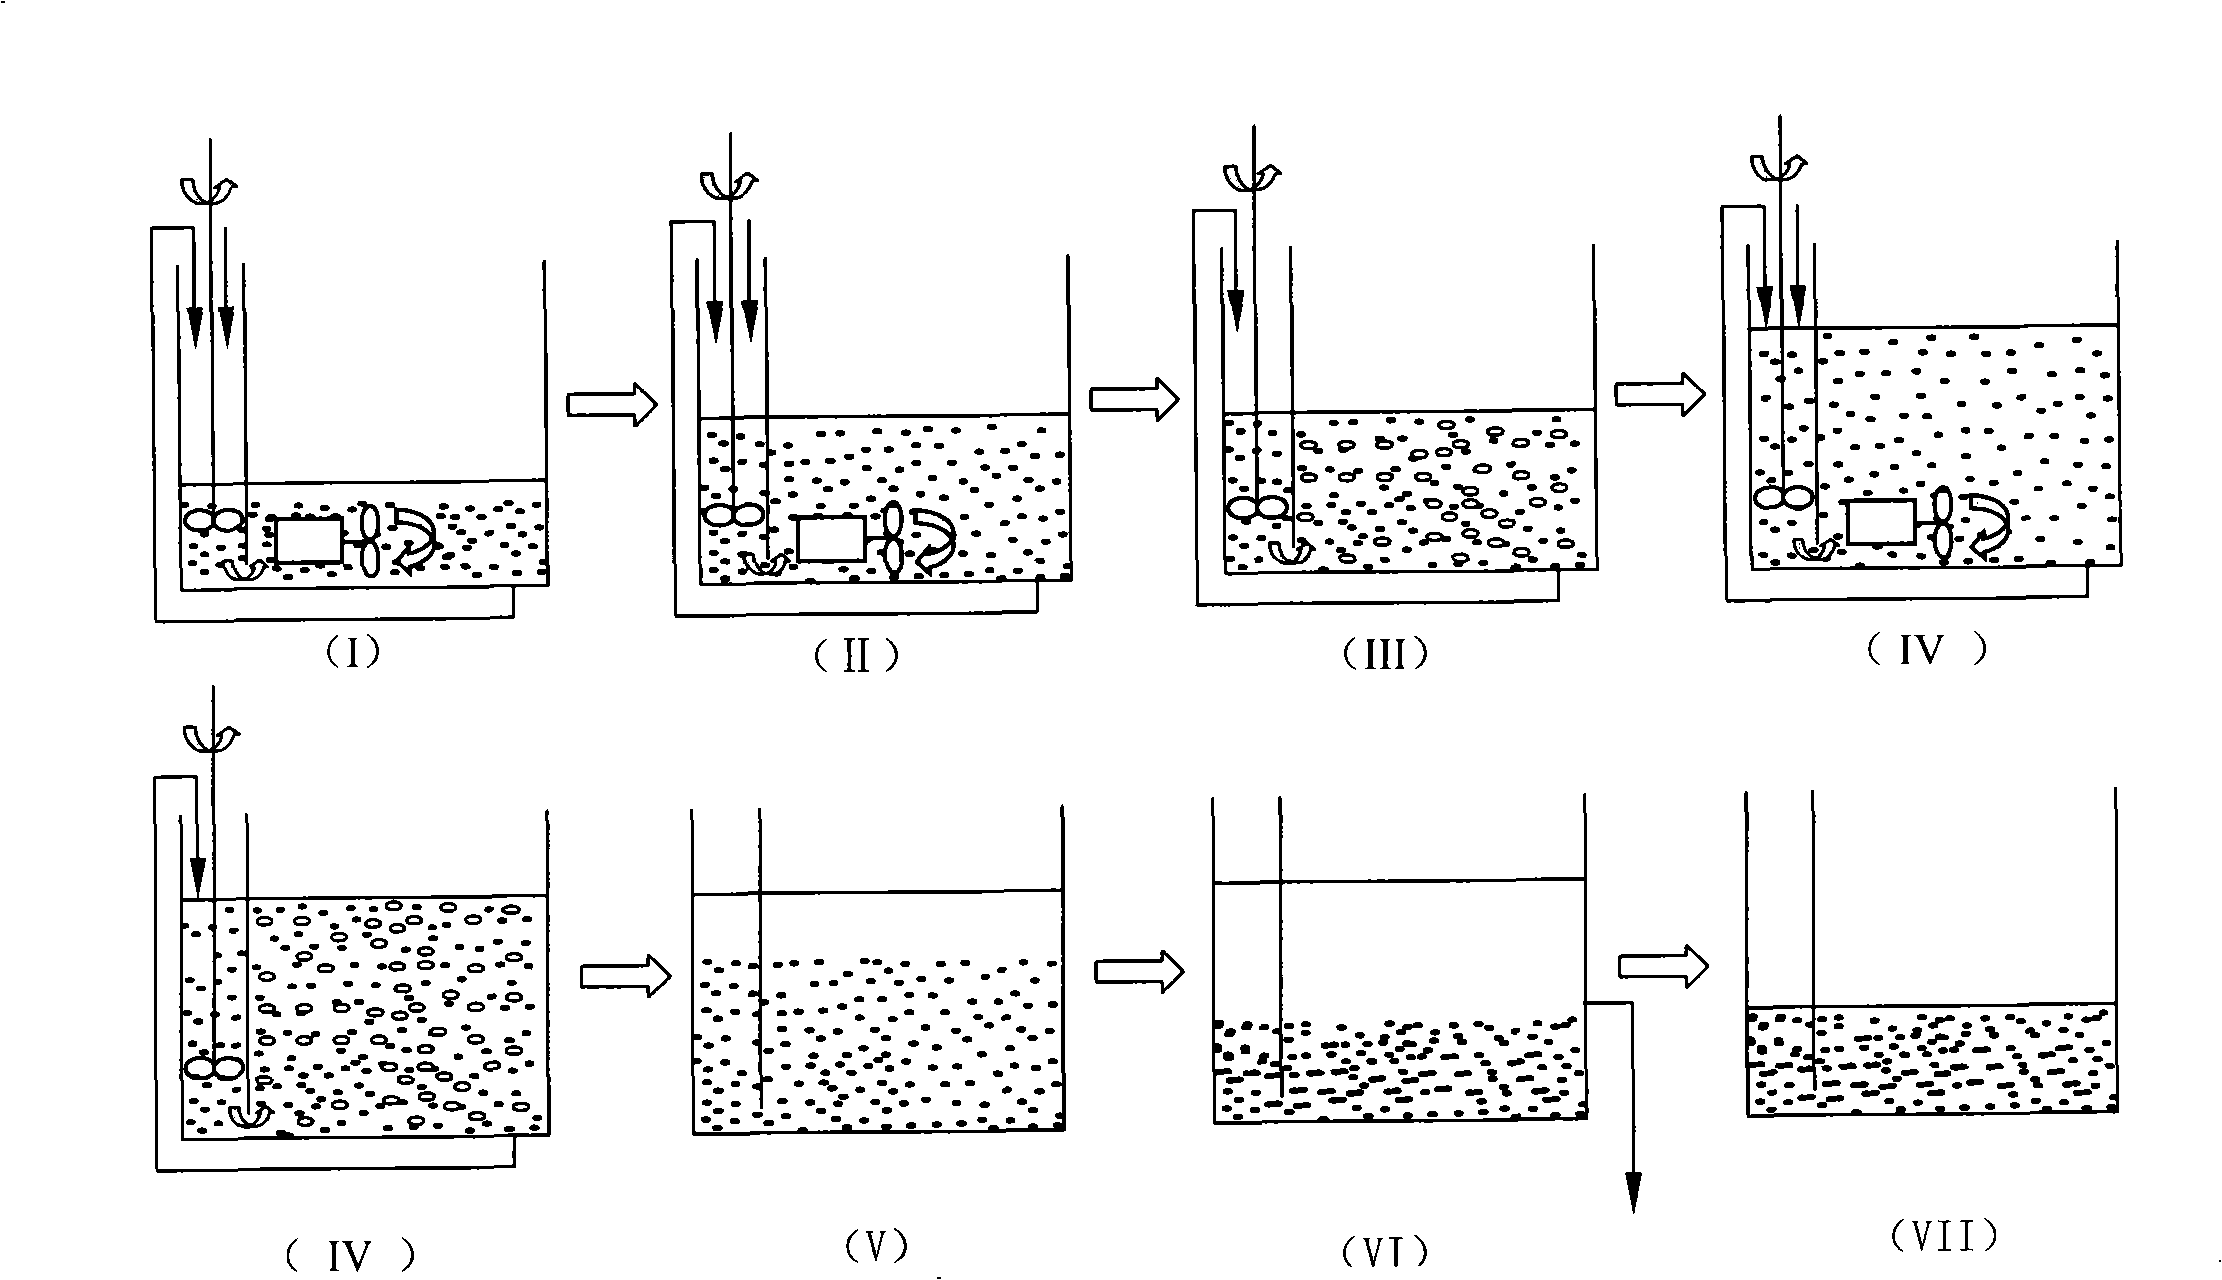 CAST segmenting water feed reinforced denitrification process control system